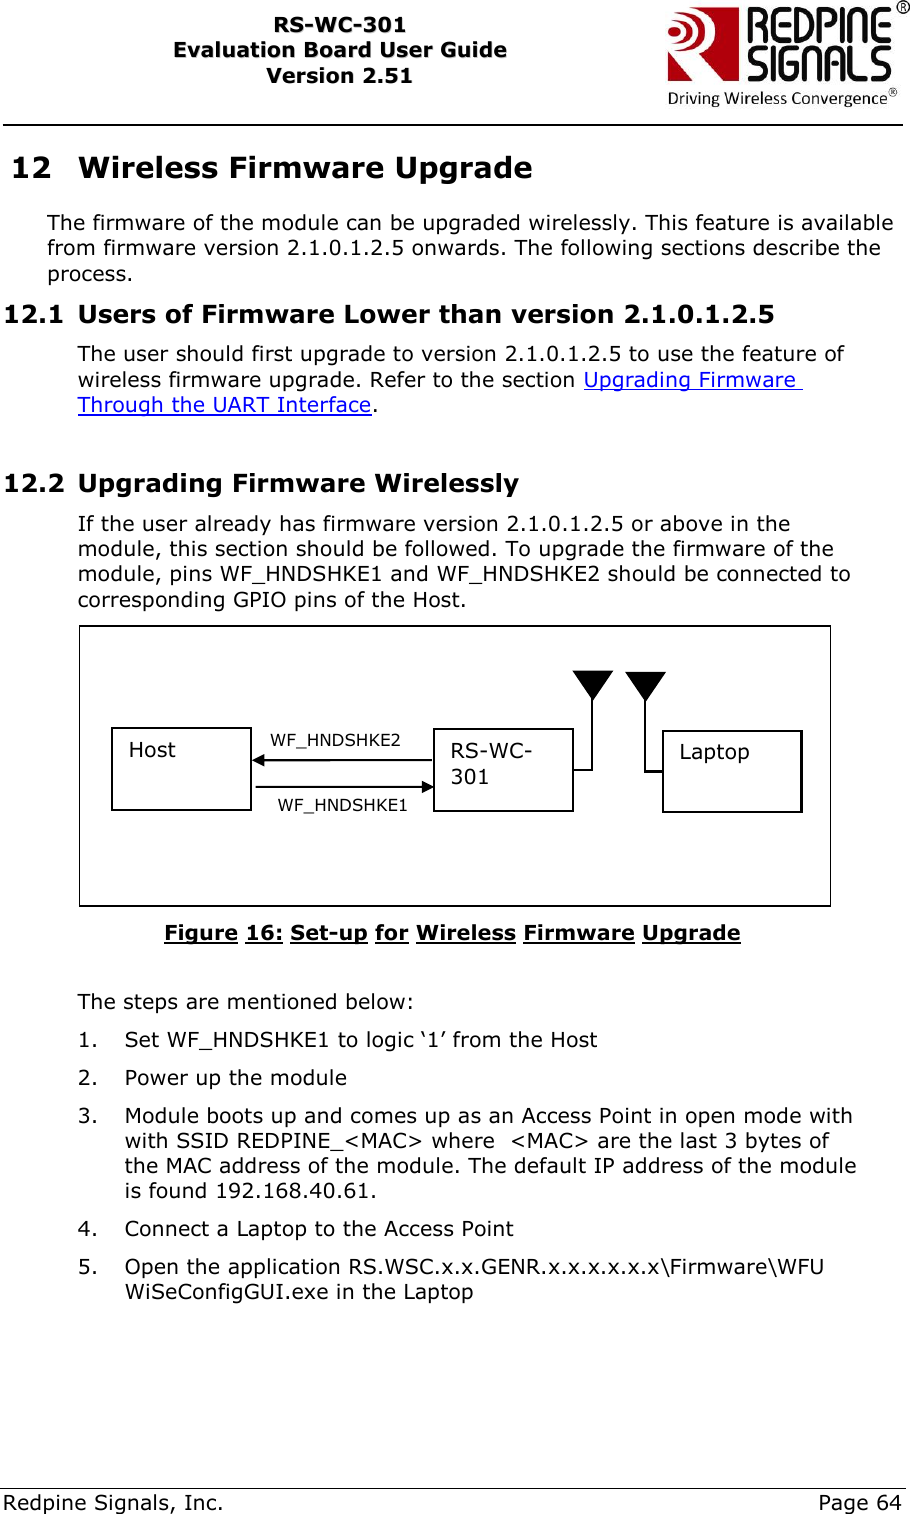     Redpine Signals, Inc.     Page 64 RRSS--WWCC--330011    EEvvaalluuaattiioonn  BBooaarrdd  UUsseerr  GGuuiiddee  VVeerrssiioonn  22..5511    12 Wireless Firmware Upgrade The firmware of the module can be upgraded wirelessly. This feature is available from firmware version 2.1.0.1.2.5 onwards. The following sections describe the process. 12.1 Users of Firmware Lower than version 2.1.0.1.2.5 The user should first upgrade to version 2.1.0.1.2.5 to use the feature of wireless firmware upgrade. Refer to the section Upgrading Firmware Through the UART Interface.   12.2 Upgrading Firmware Wirelessly  If the user already has firmware version 2.1.0.1.2.5 or above in the module, this section should be followed. To upgrade the firmware of the module, pins WF_HNDSHKE1 and WF_HNDSHKE2 should be connected to corresponding GPIO pins of the Host.  Figure 16: Set-up for Wireless Firmware Upgrade  The steps are mentioned below: 1. Set WF_HNDSHKE1 to logic „1‟ from the Host 2. Power up the module 3. Module boots up and comes up as an Access Point in open mode with with SSID REDPINE_&lt;MAC&gt; where  &lt;MAC&gt; are the last 3 bytes of the MAC address of the module. The default IP address of the module is found 192.168.40.61.  4. Connect a Laptop to the Access Point 5. Open the application RS.WSC.x.x.GENR.x.x.x.x.x.x\Firmware\WFU WiSeConfigGUI.exe in the Laptop Host RS-WC-301 Laptop WF_HNDSHKE2 WF_HNDSHKE1 